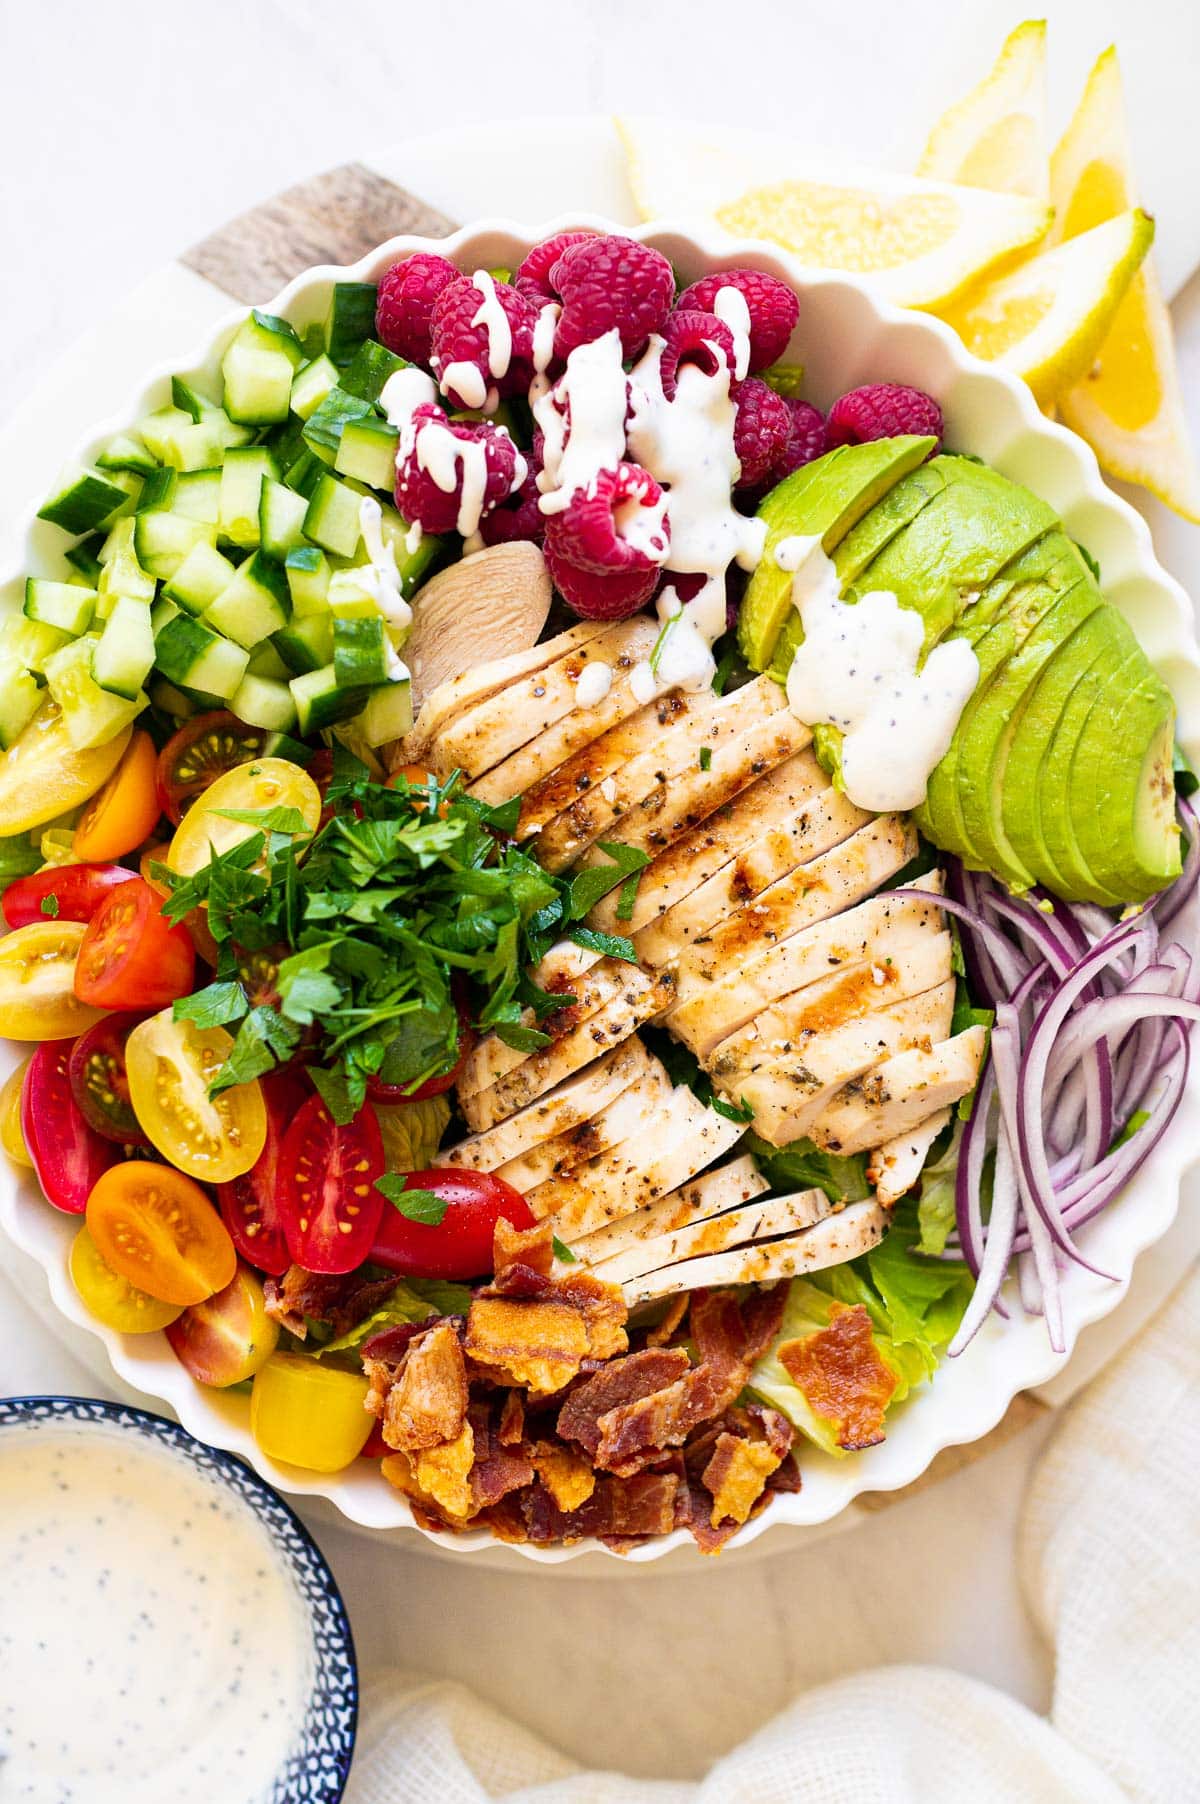 A bowl with salad with grilled chicken, avocado, red onion, parsley, lettuce and bacon. Lemon slices and salad dressing on the side.